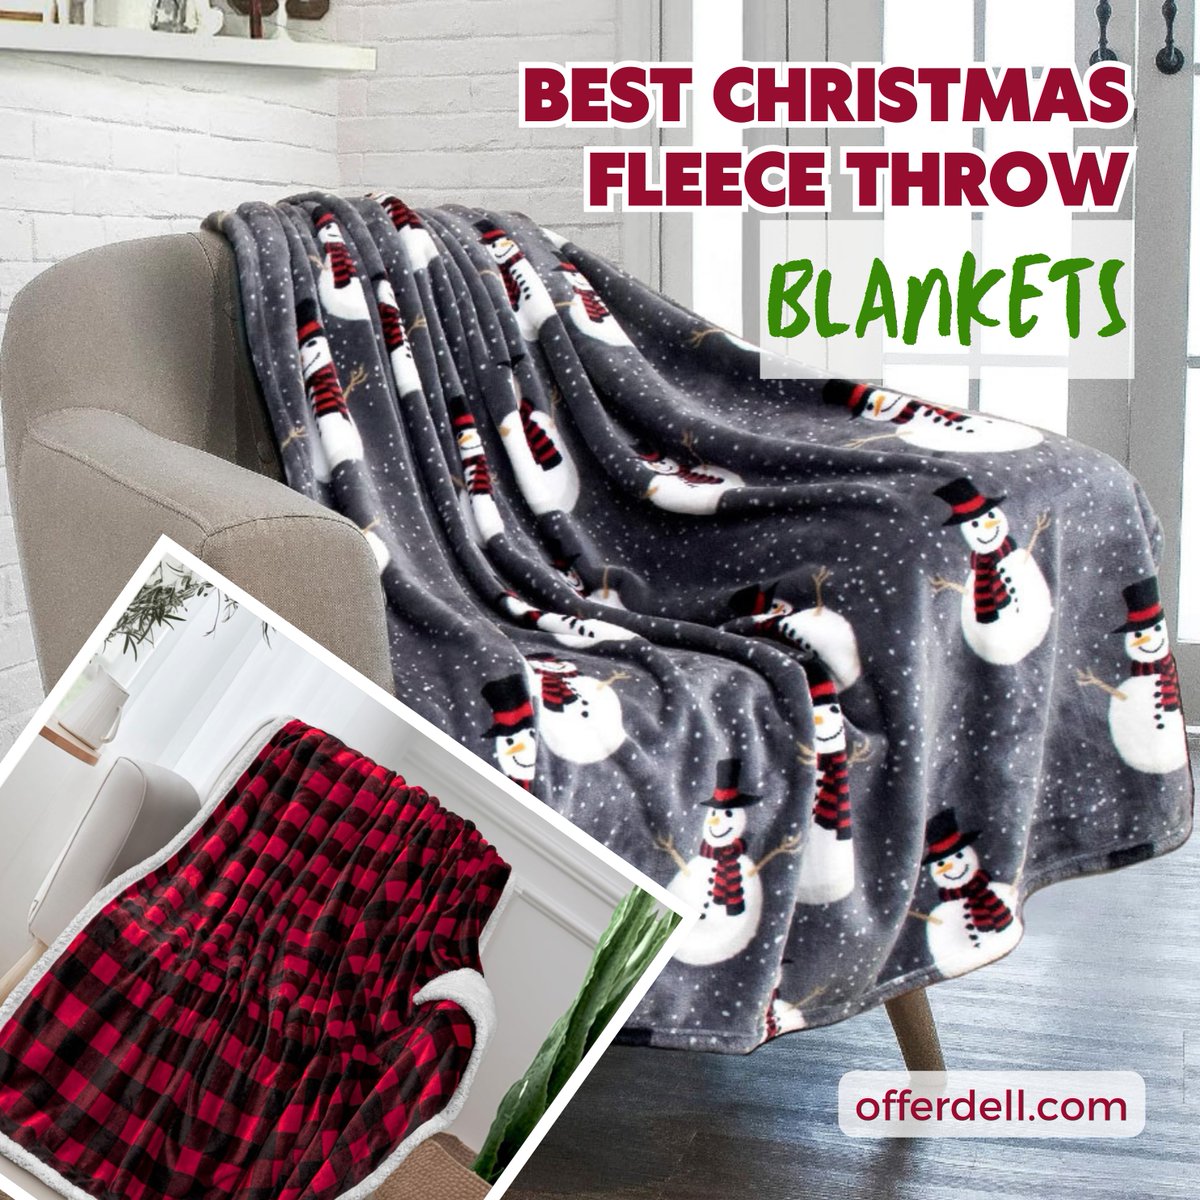 Best Christmas Fleece Throw Blankets: Cozy Gifts for Every Occasion.
Read Now: offerdell.com/10-best-christ…
#christmas #christmasdecor #christmasblanket #christmasblankets #throwblankets #fleeceblankets #babyblankets #homedecor #bedroomdecor #livingroomdecor #movieblankets